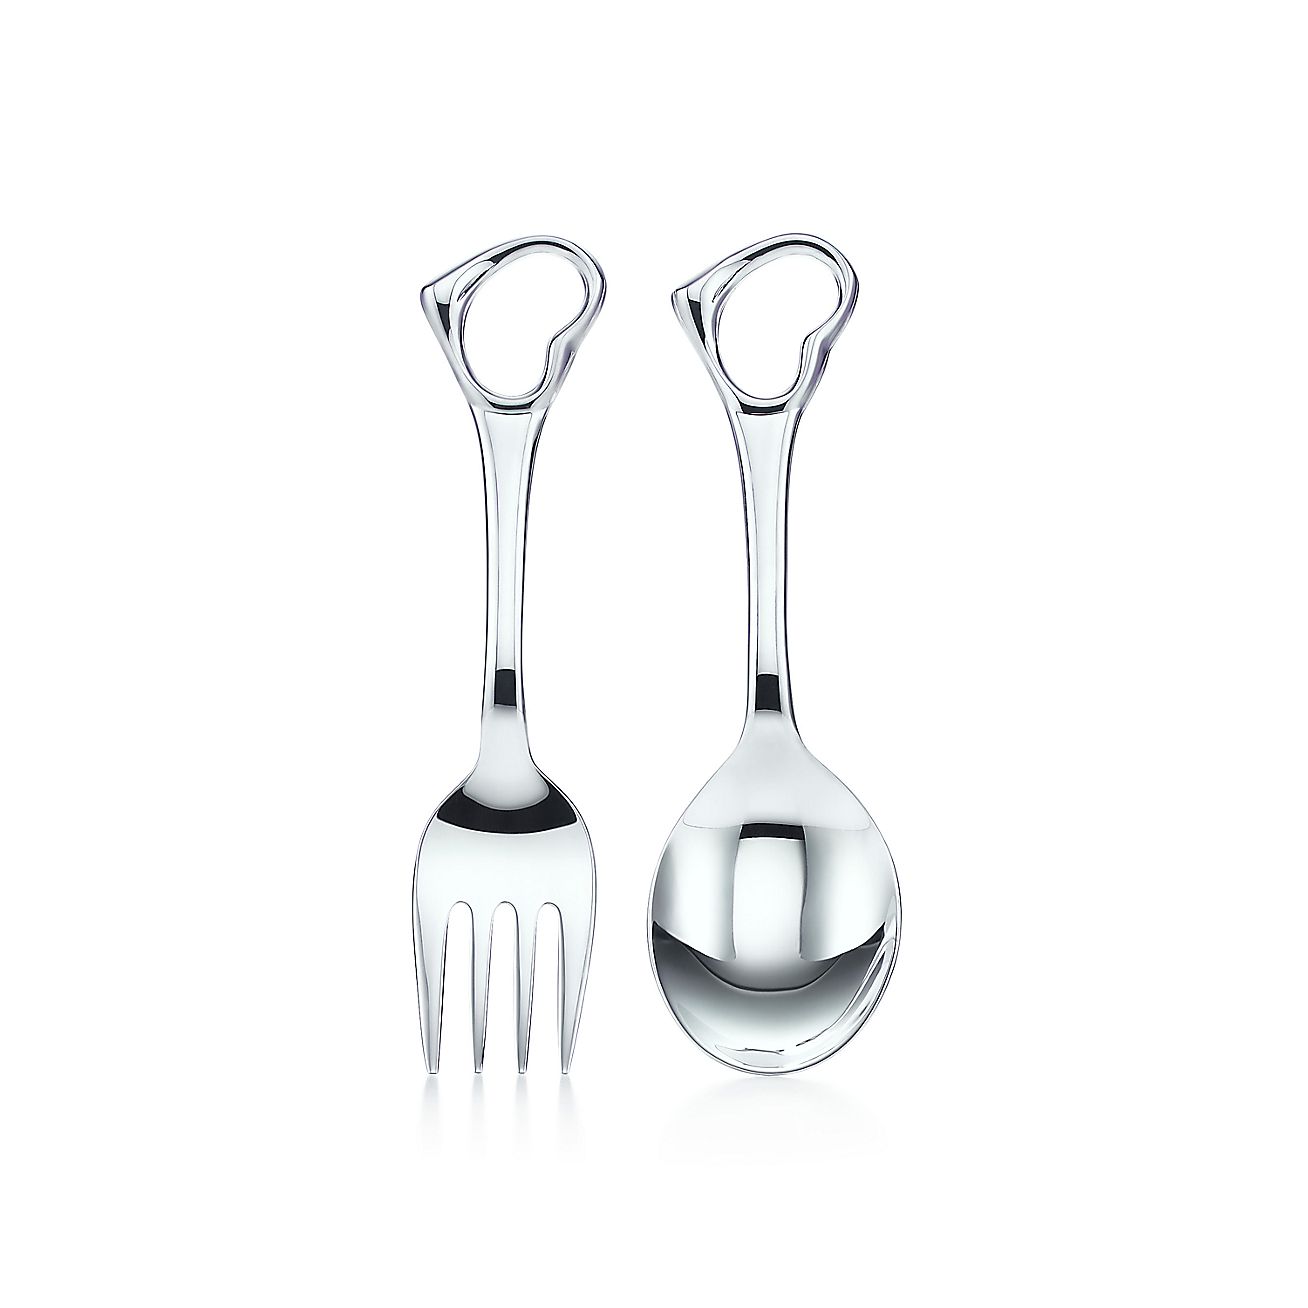 Twisted Head Baby Spoon Set - Looped Handle Spoon Fork Duo – TheToddly